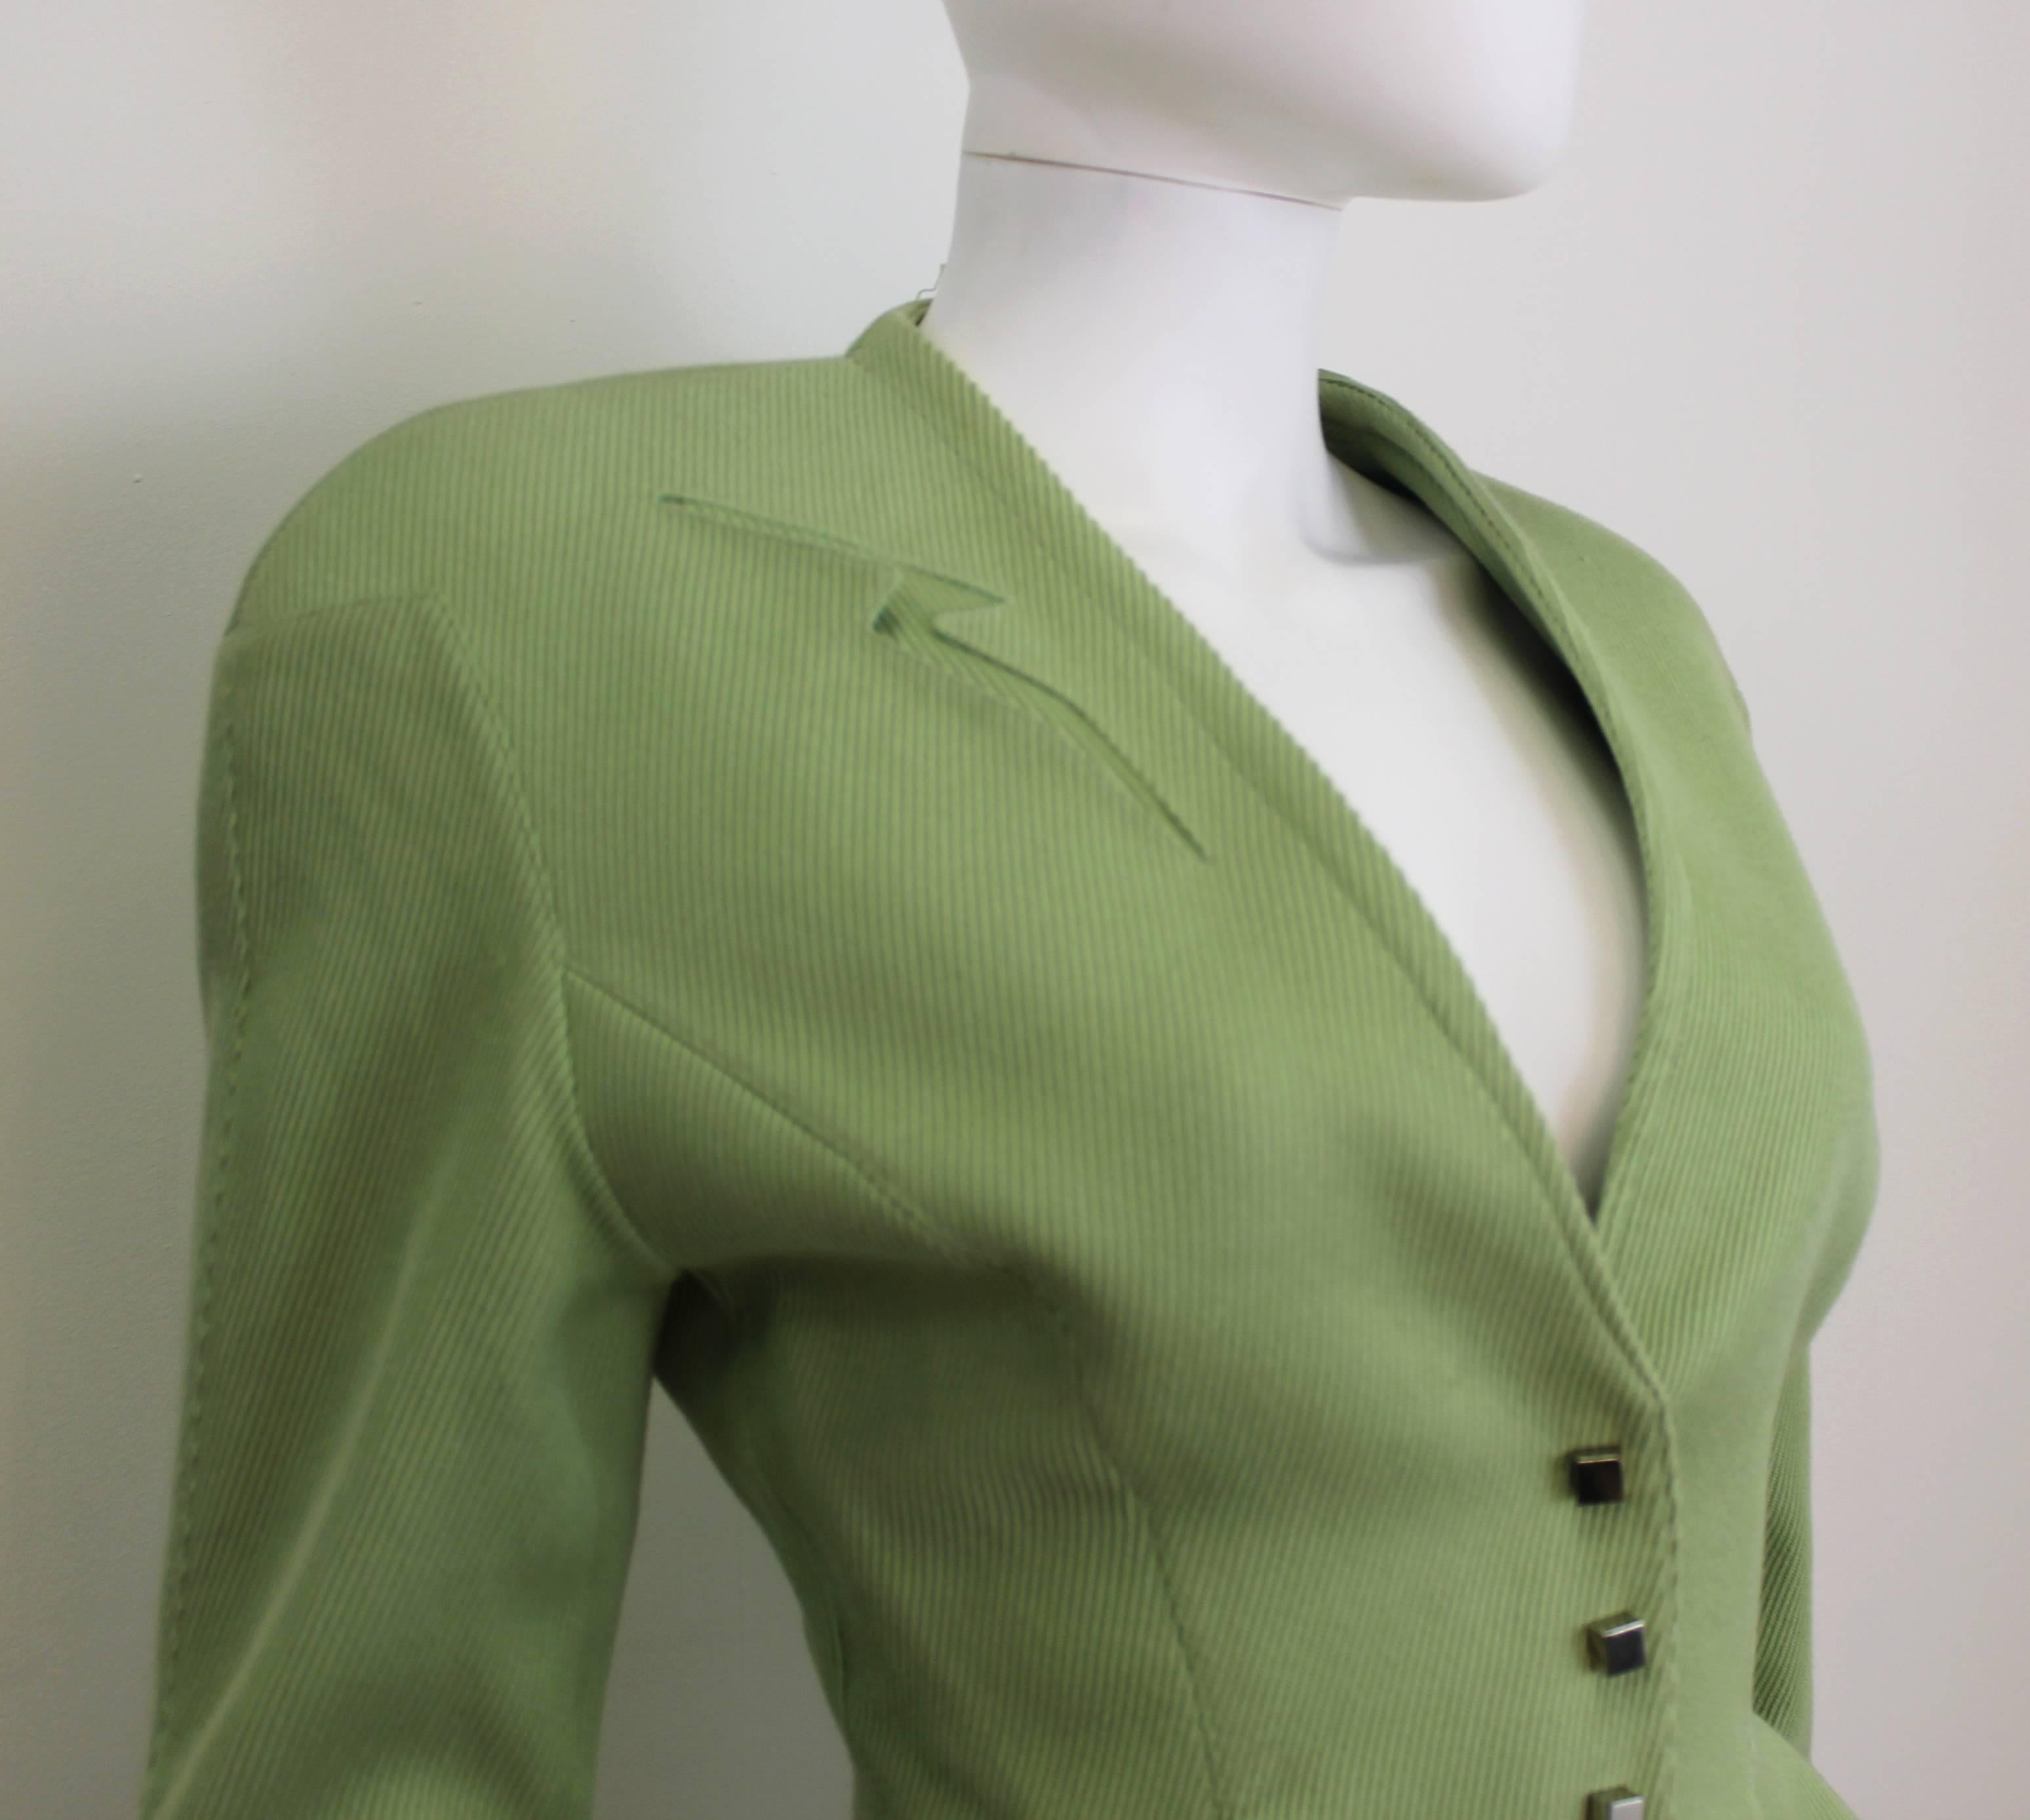 Iconic Thierry Mugler light green jacket from the 1990's. Features cut-out lightening bolt detail pocket on upper right chest and a flared peplum.